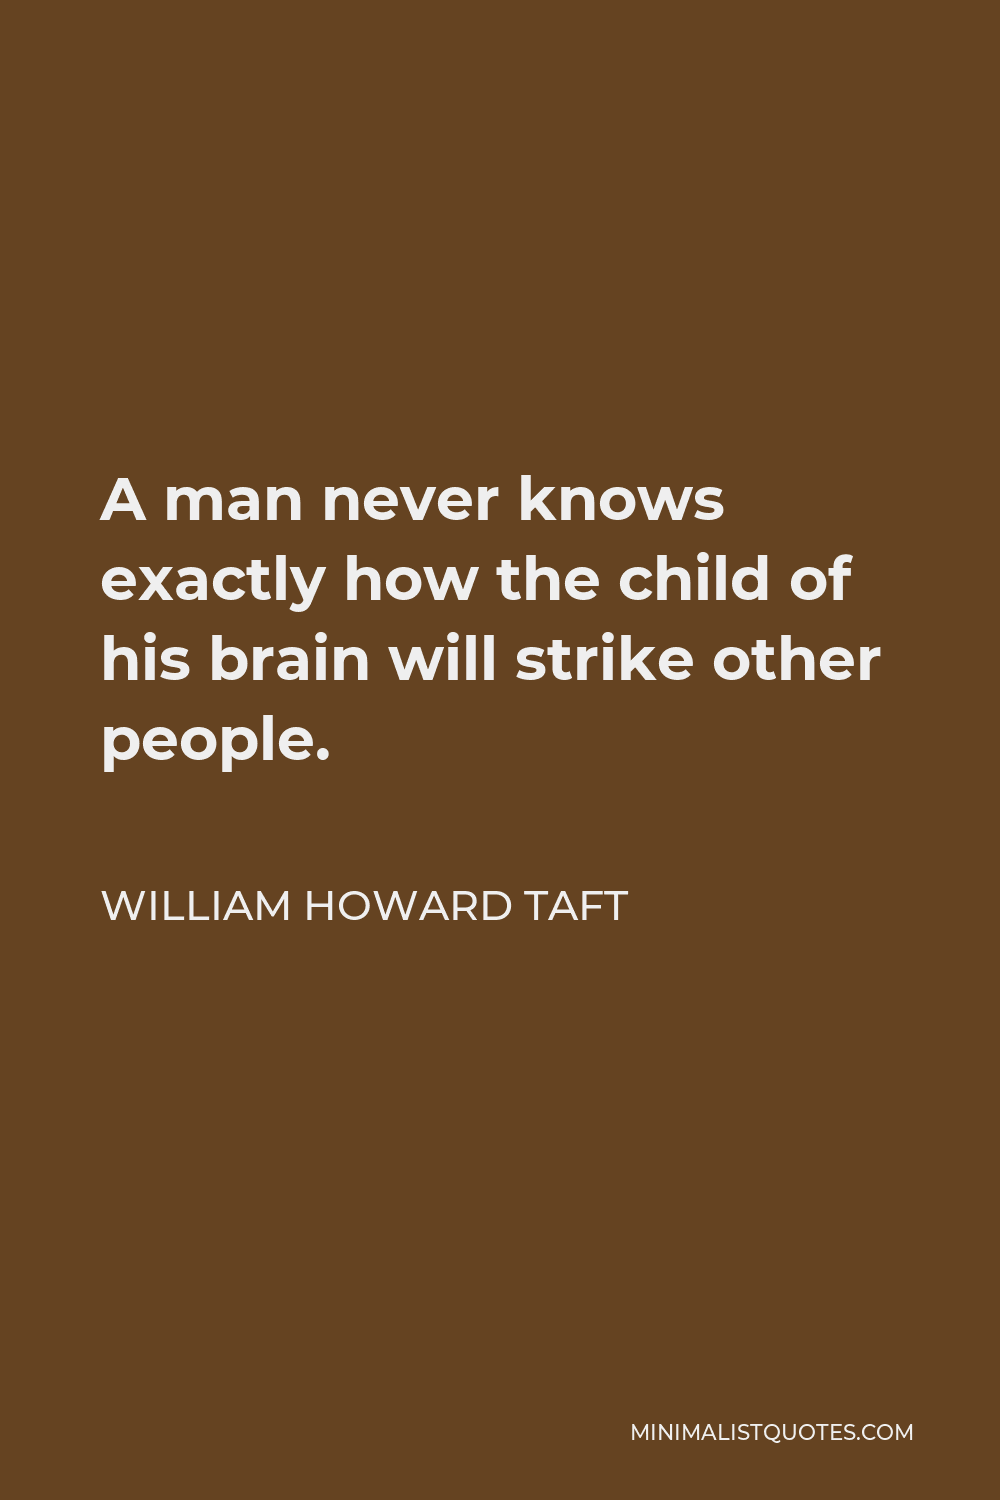 William Howard Taft Quote - A man never knows exactly how the child of his brain will strike other people.